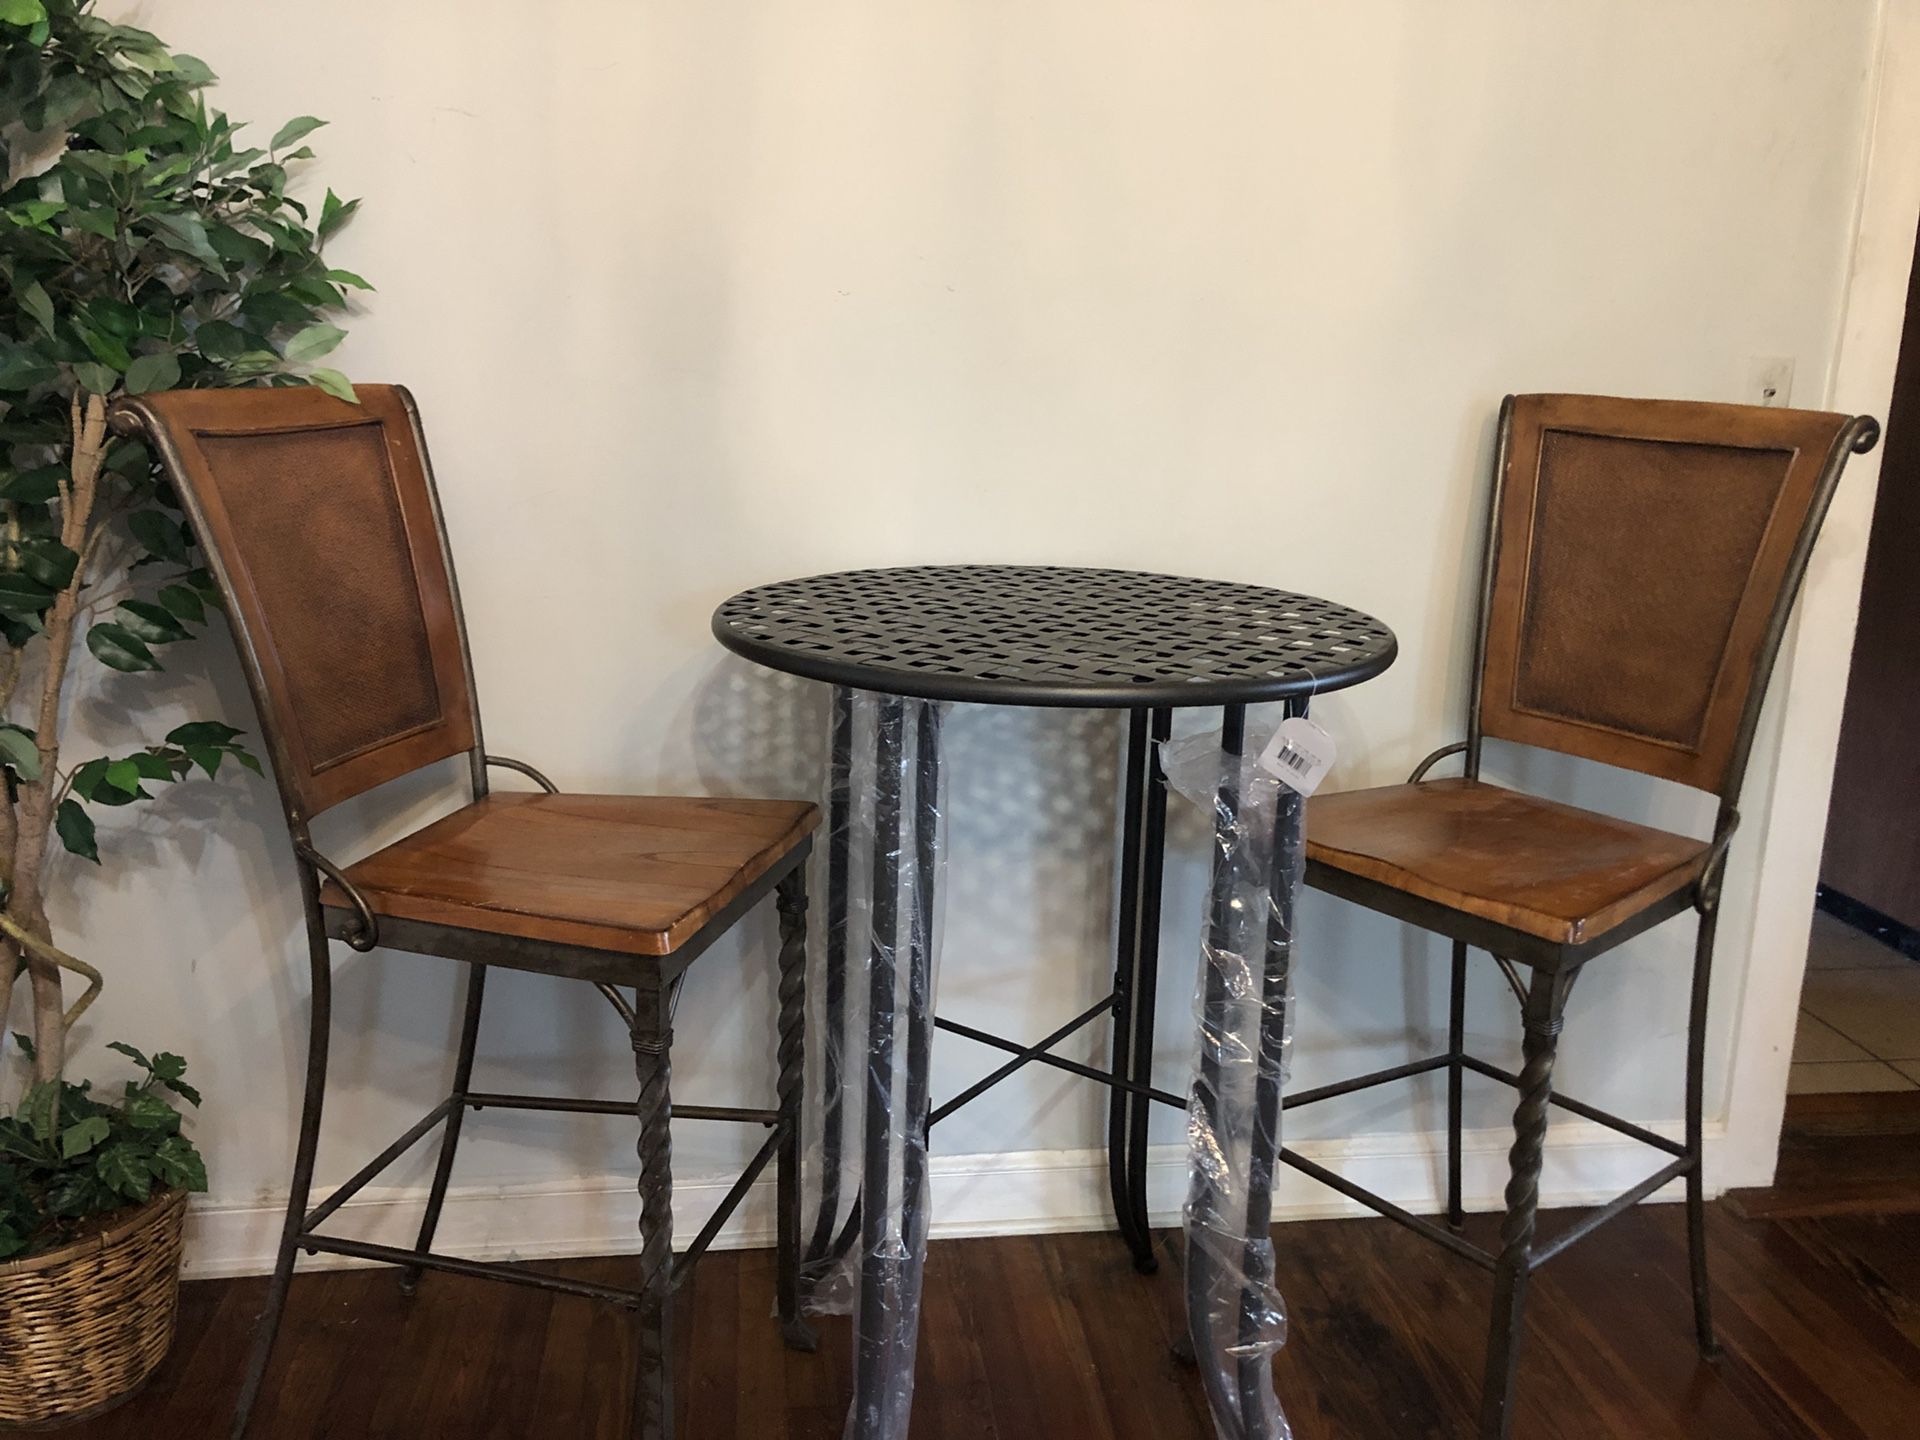 Bar chairs and table